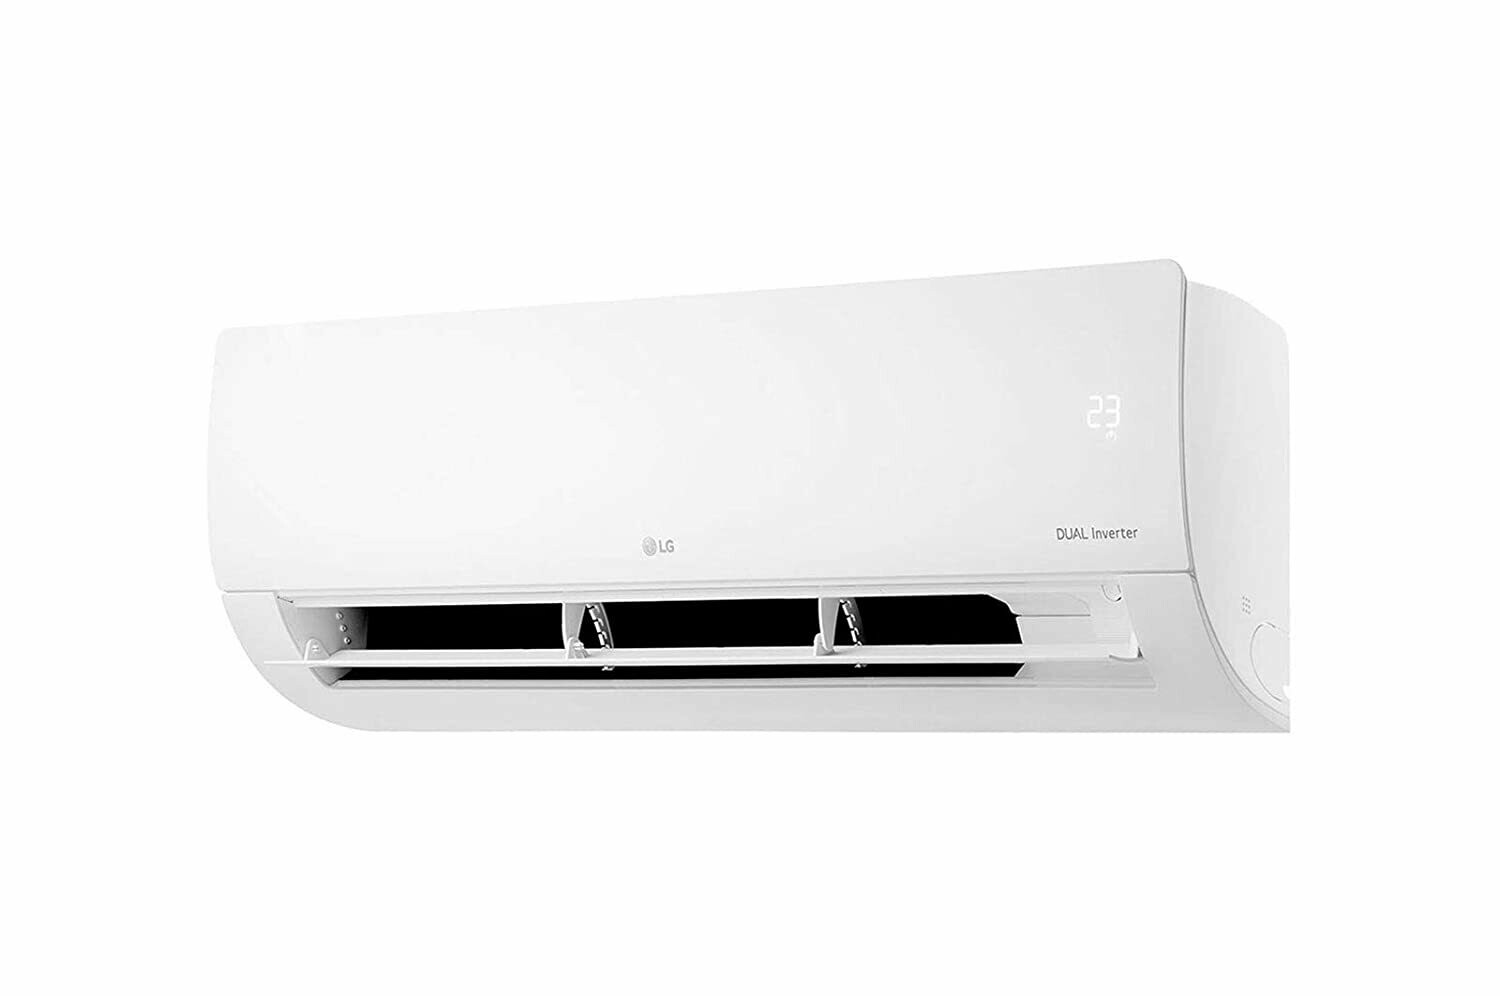 LG LS-Q12KNZA Dual Inverter 5 Star Split Air Conditioner with 4 Way Swing & Ocean Black Fin